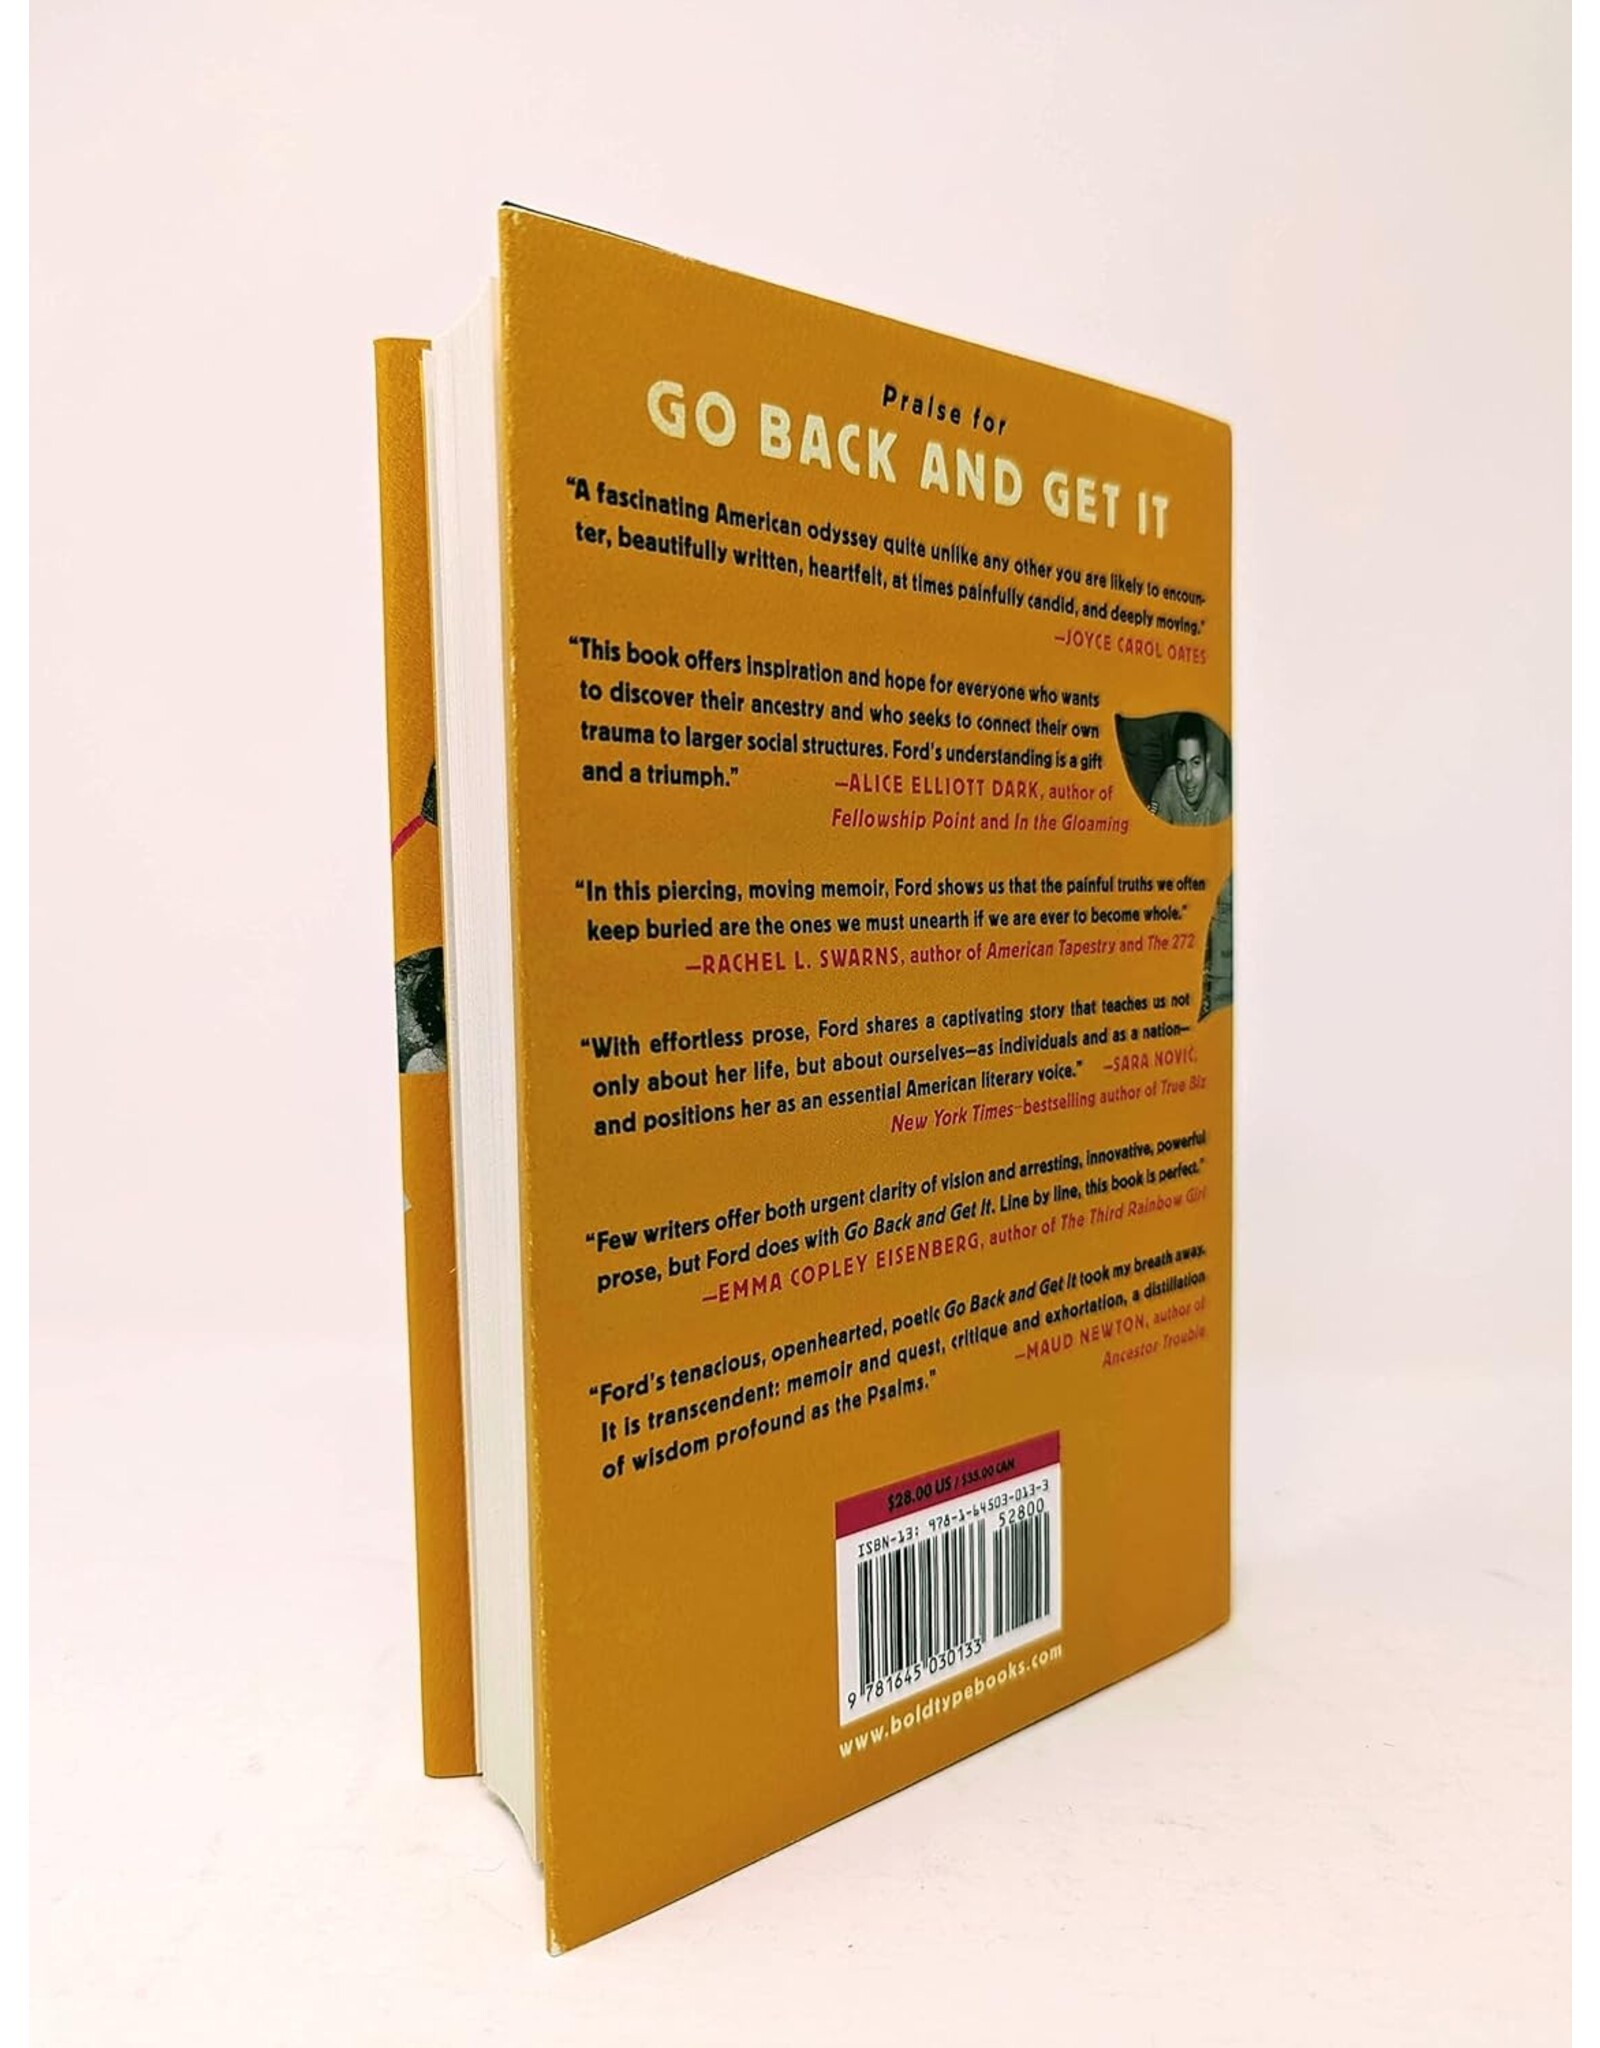 Go Back and Get It: A Memoir of Race, Inheritance, and Intergenerational Healing